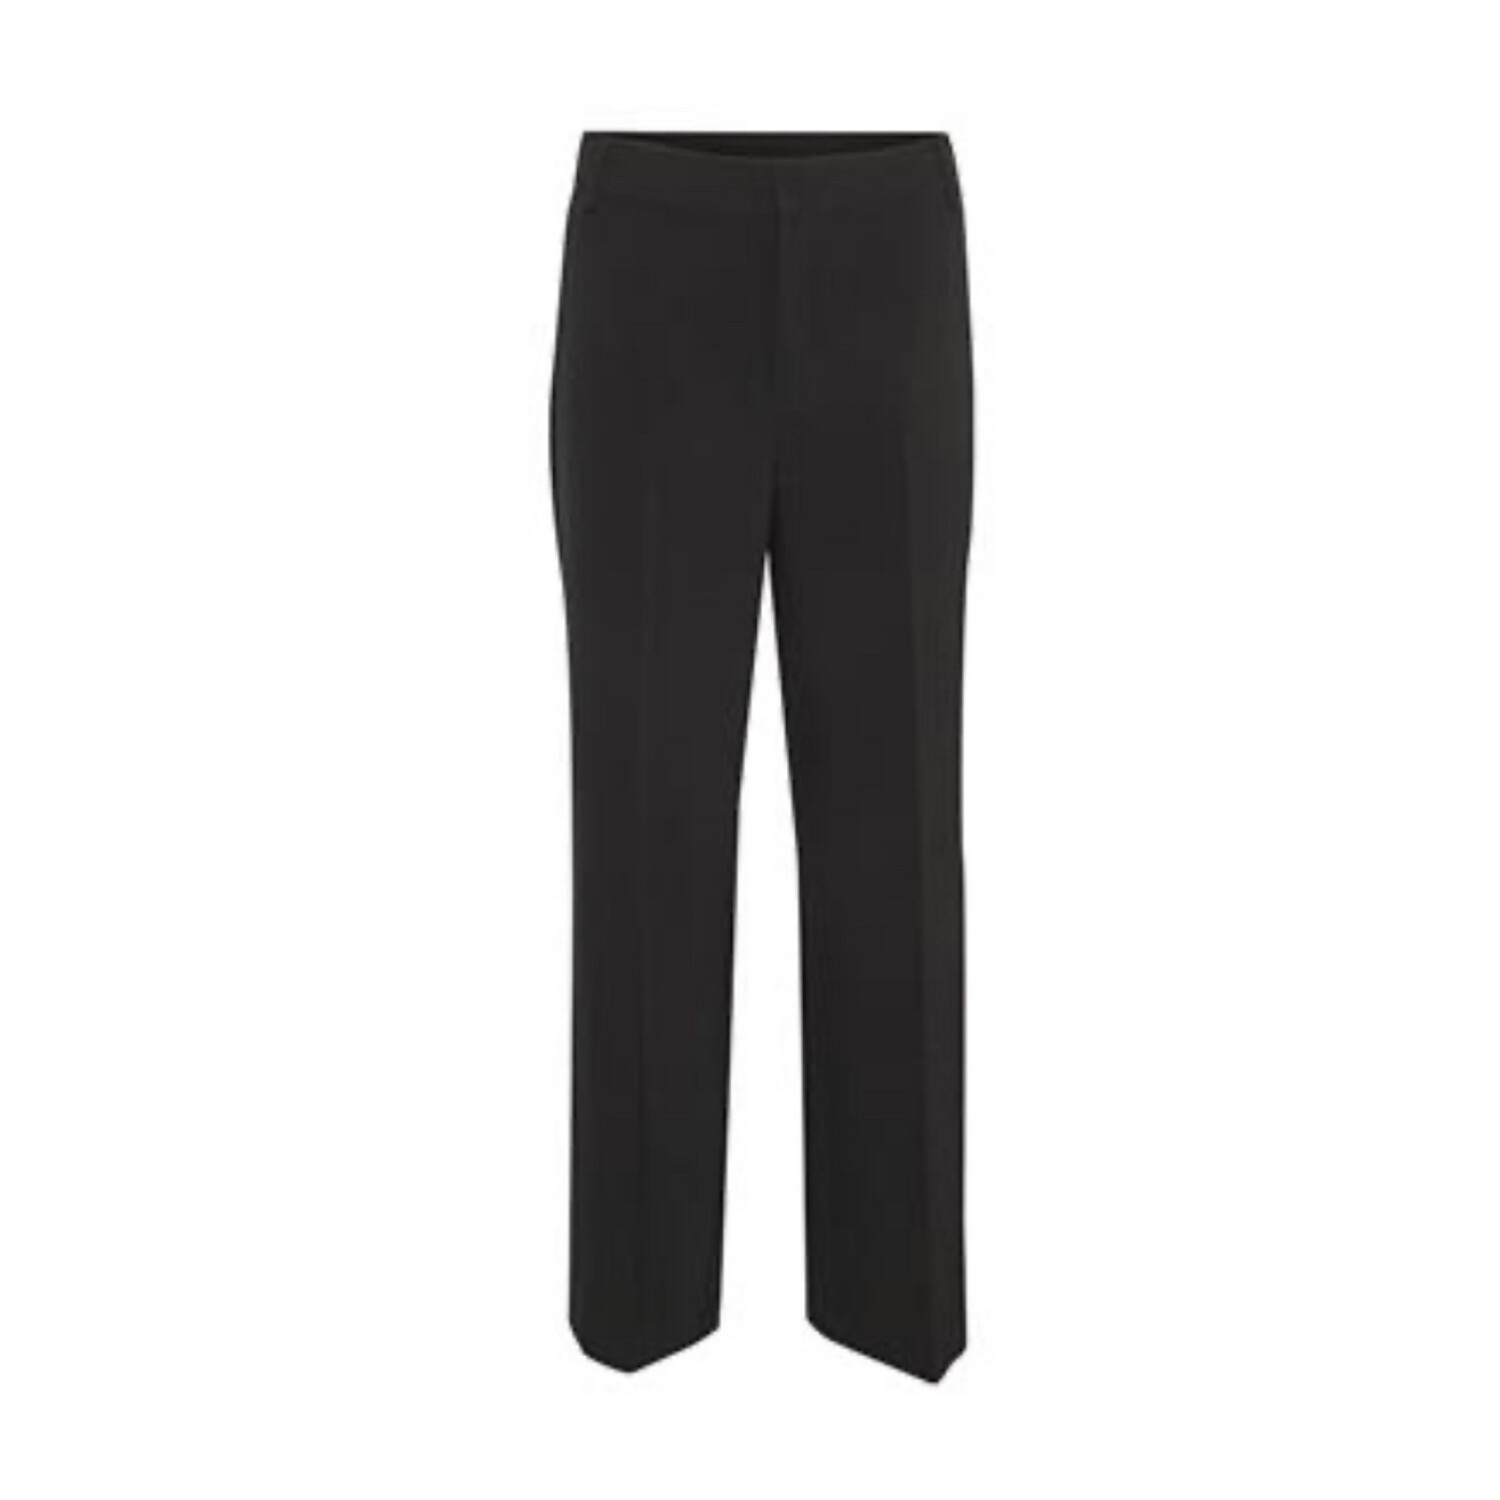 My Essential Wardrobe - The Wide TAILORED Pant